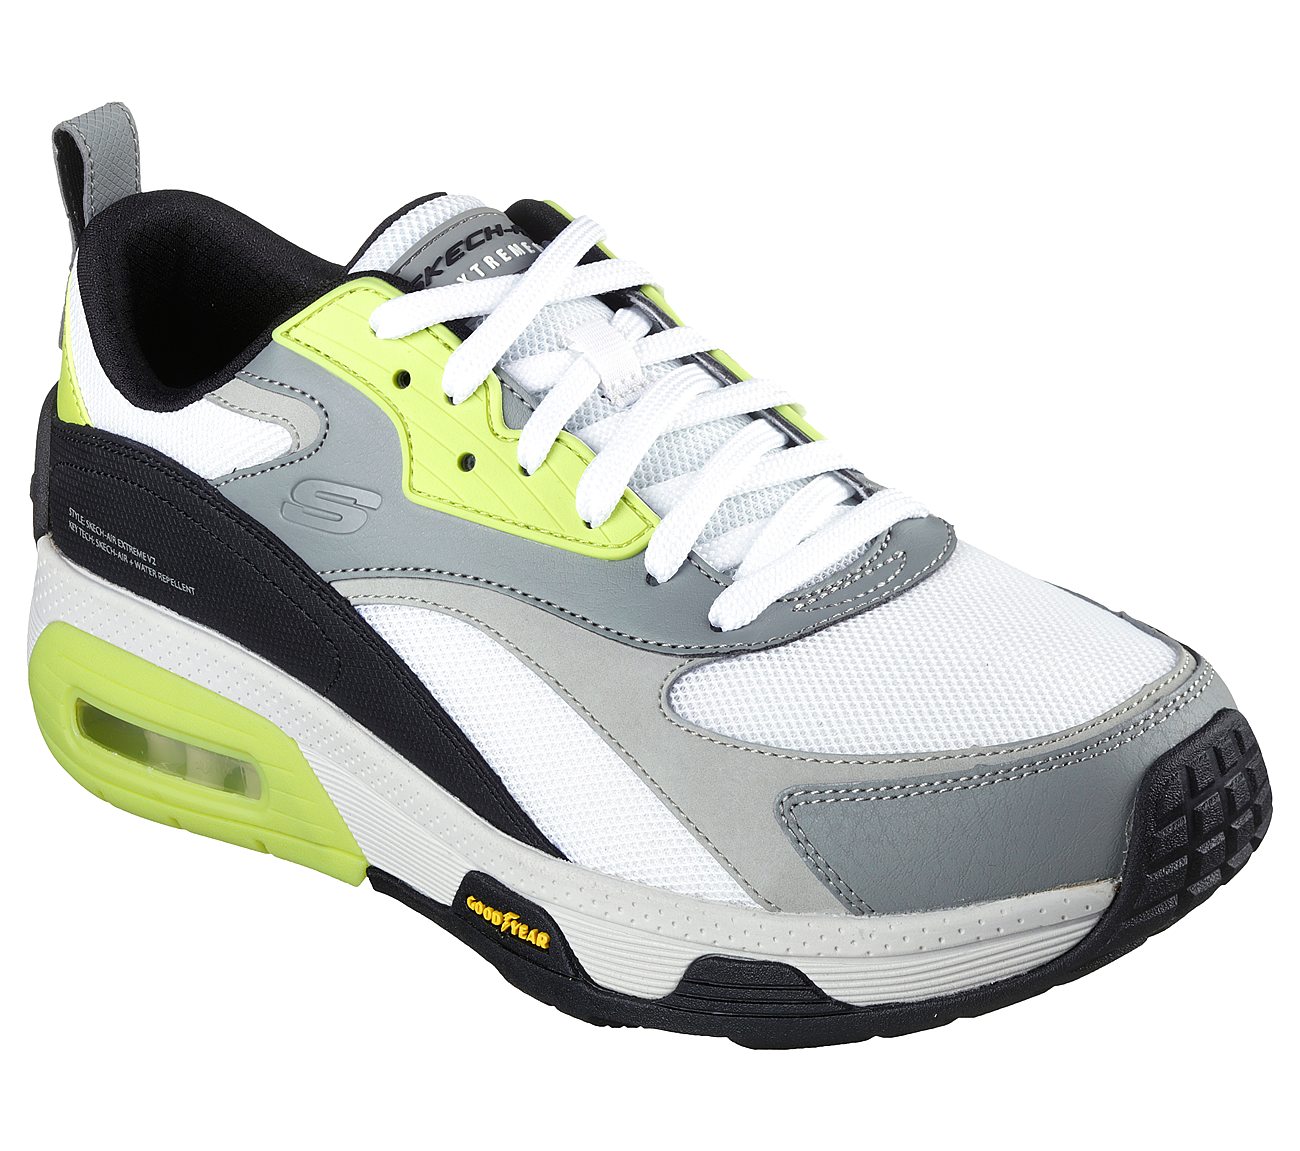 SKECH-AIR EXTREME V2, WHITE/BLACK/LIME Footwear Lateral View